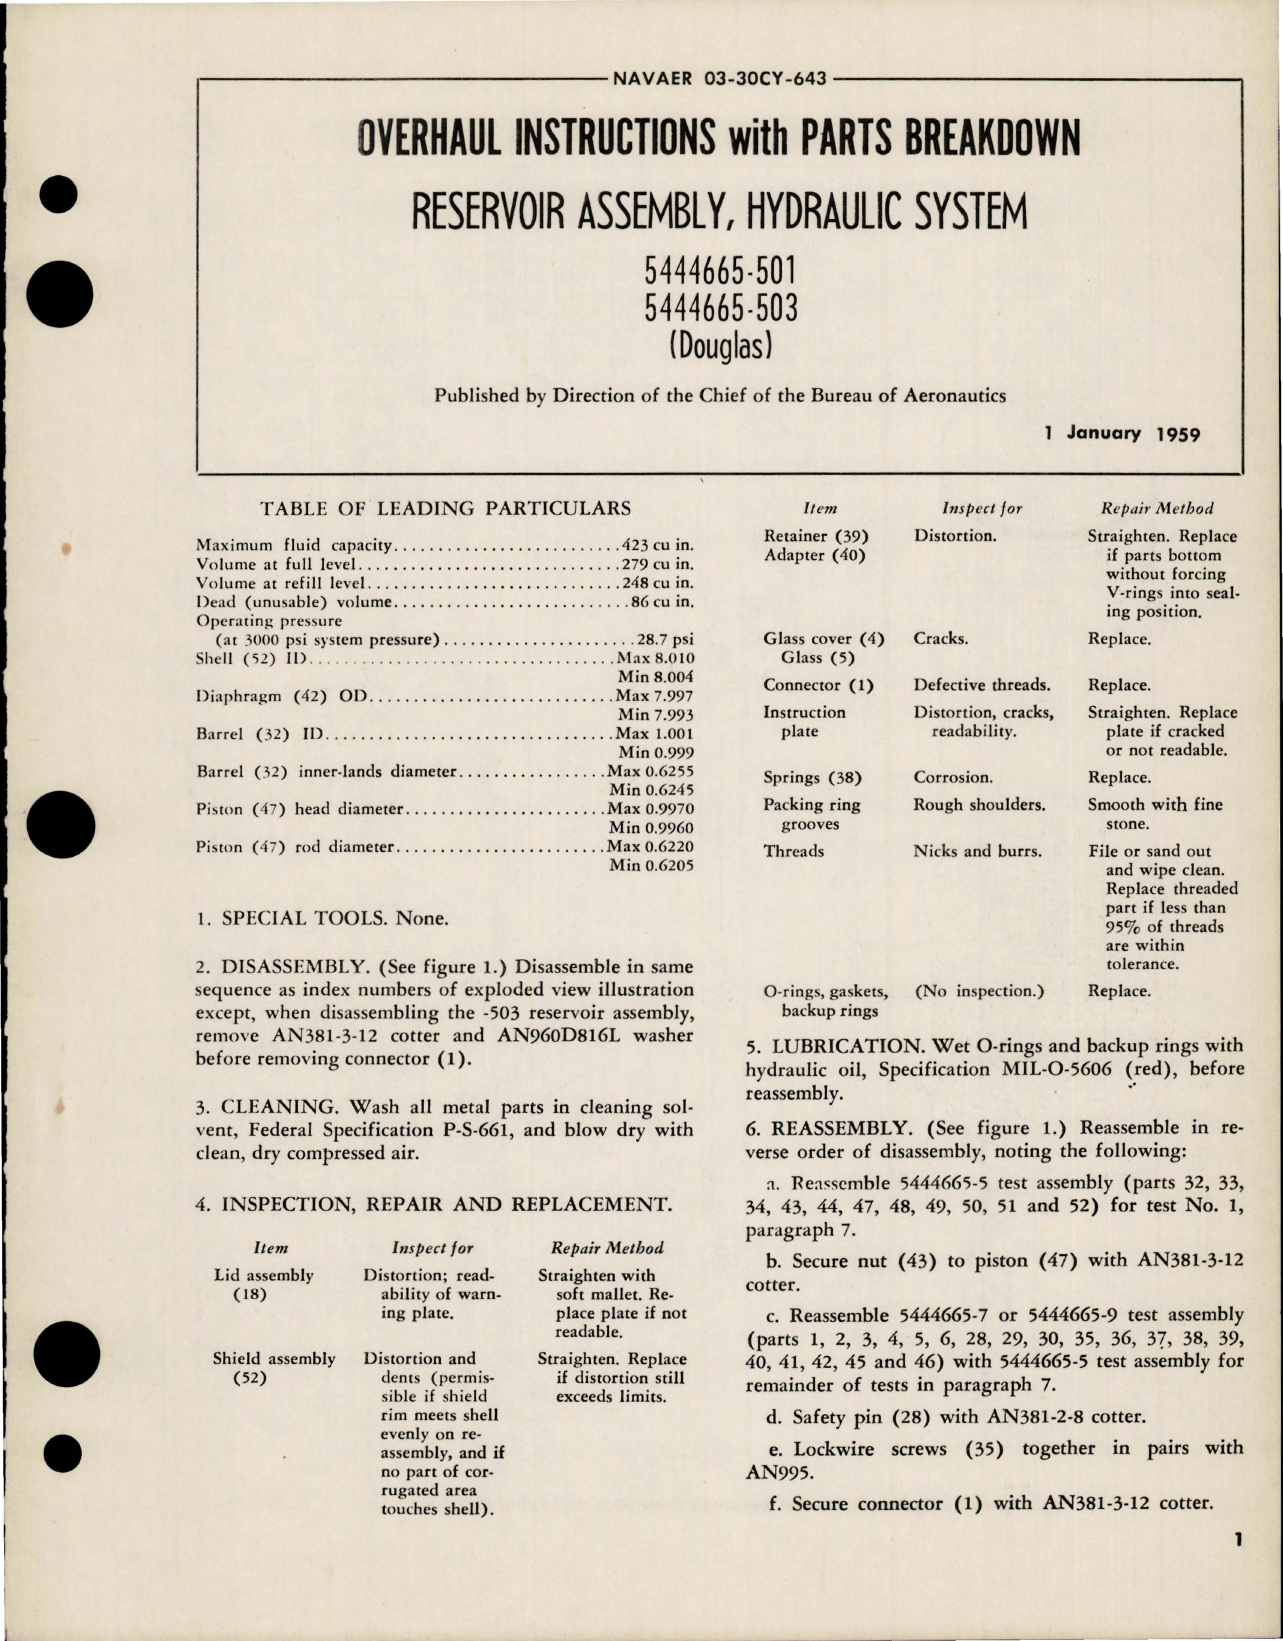 Sample page 1 from AirCorps Library document: Overhaul Instructions with Parts for Hydraulic System Reservoir Assembly - 544665-501, 544665-503